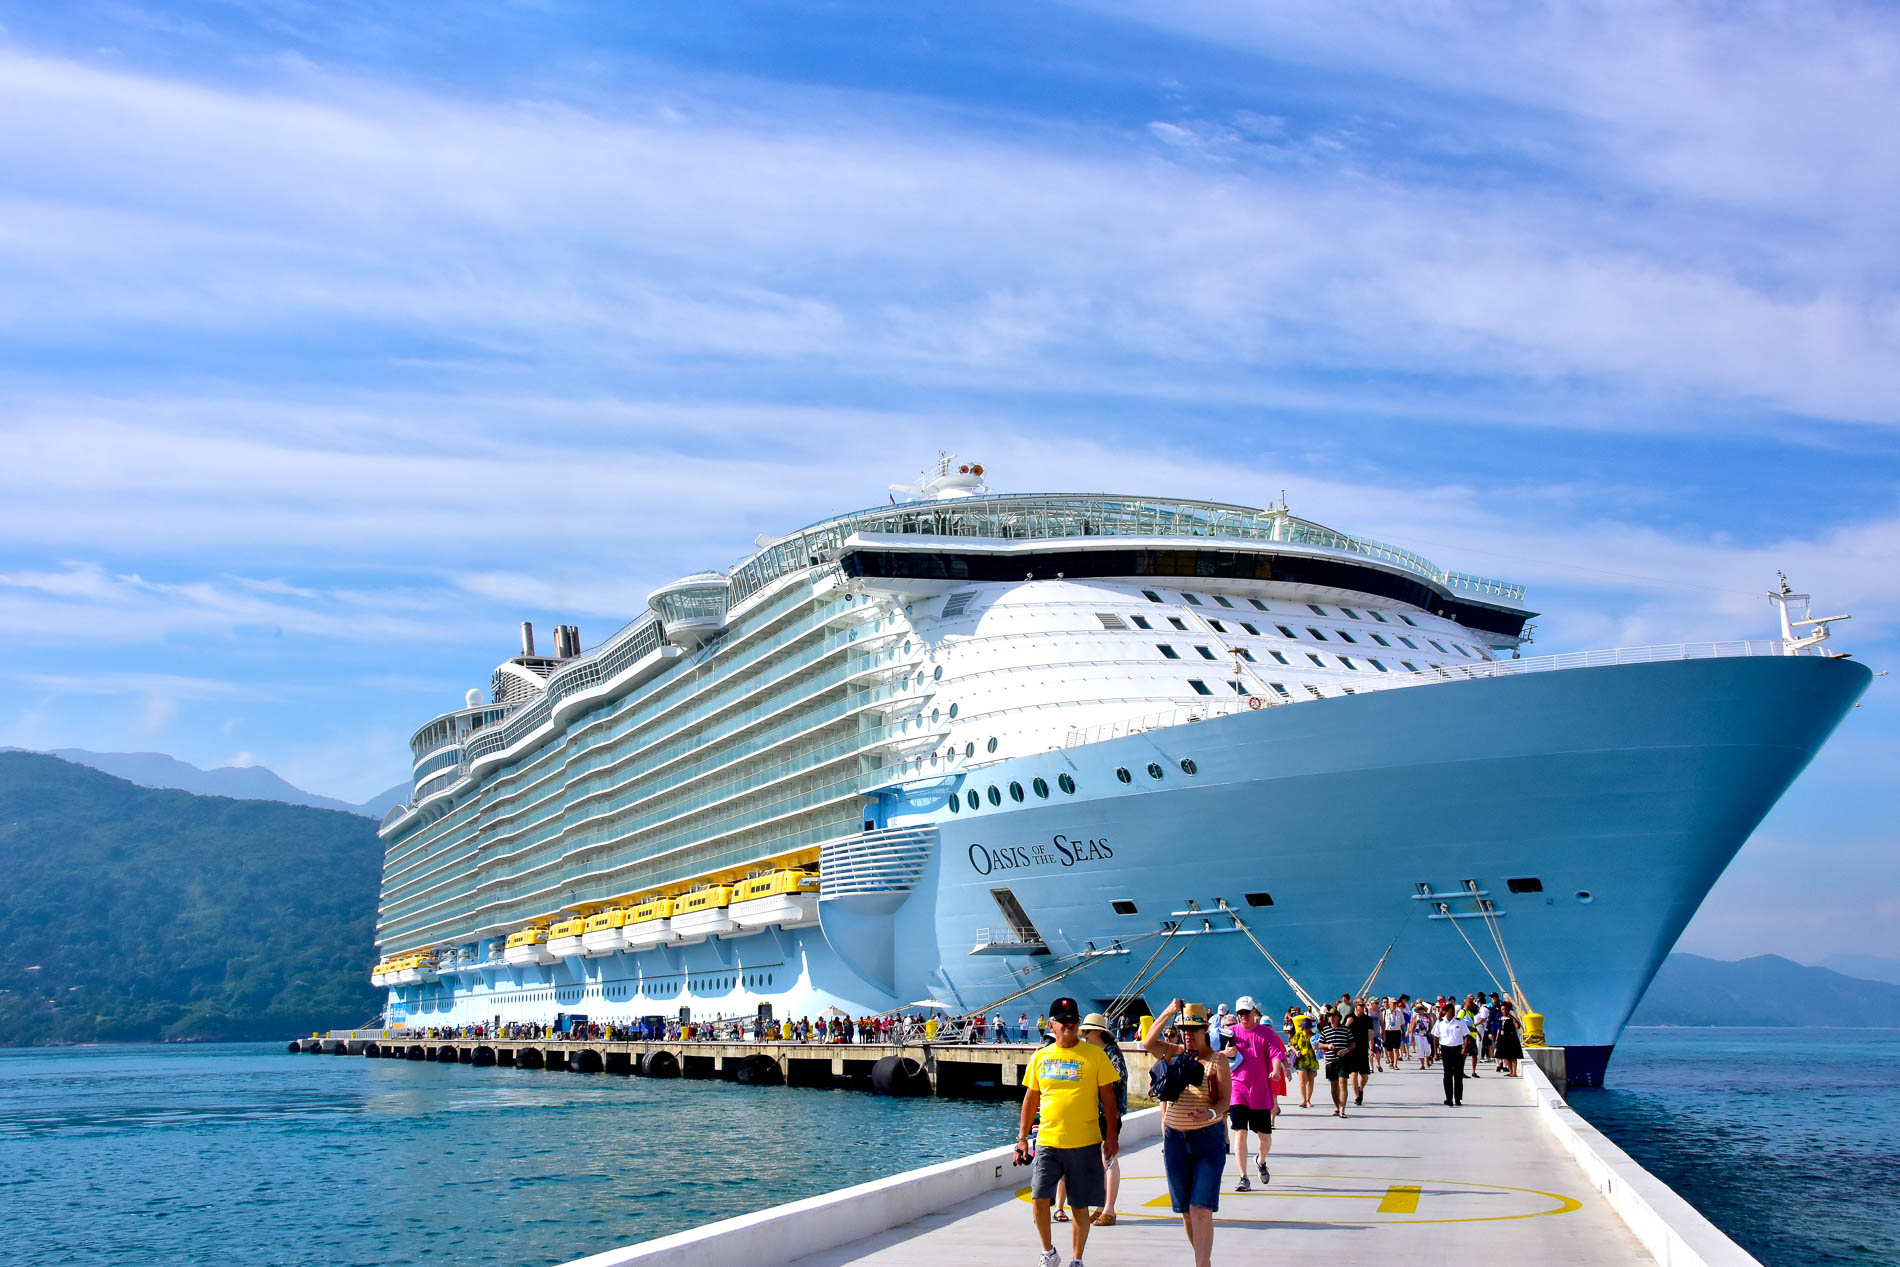 Oasis of the Seas at the Pier at Labadee